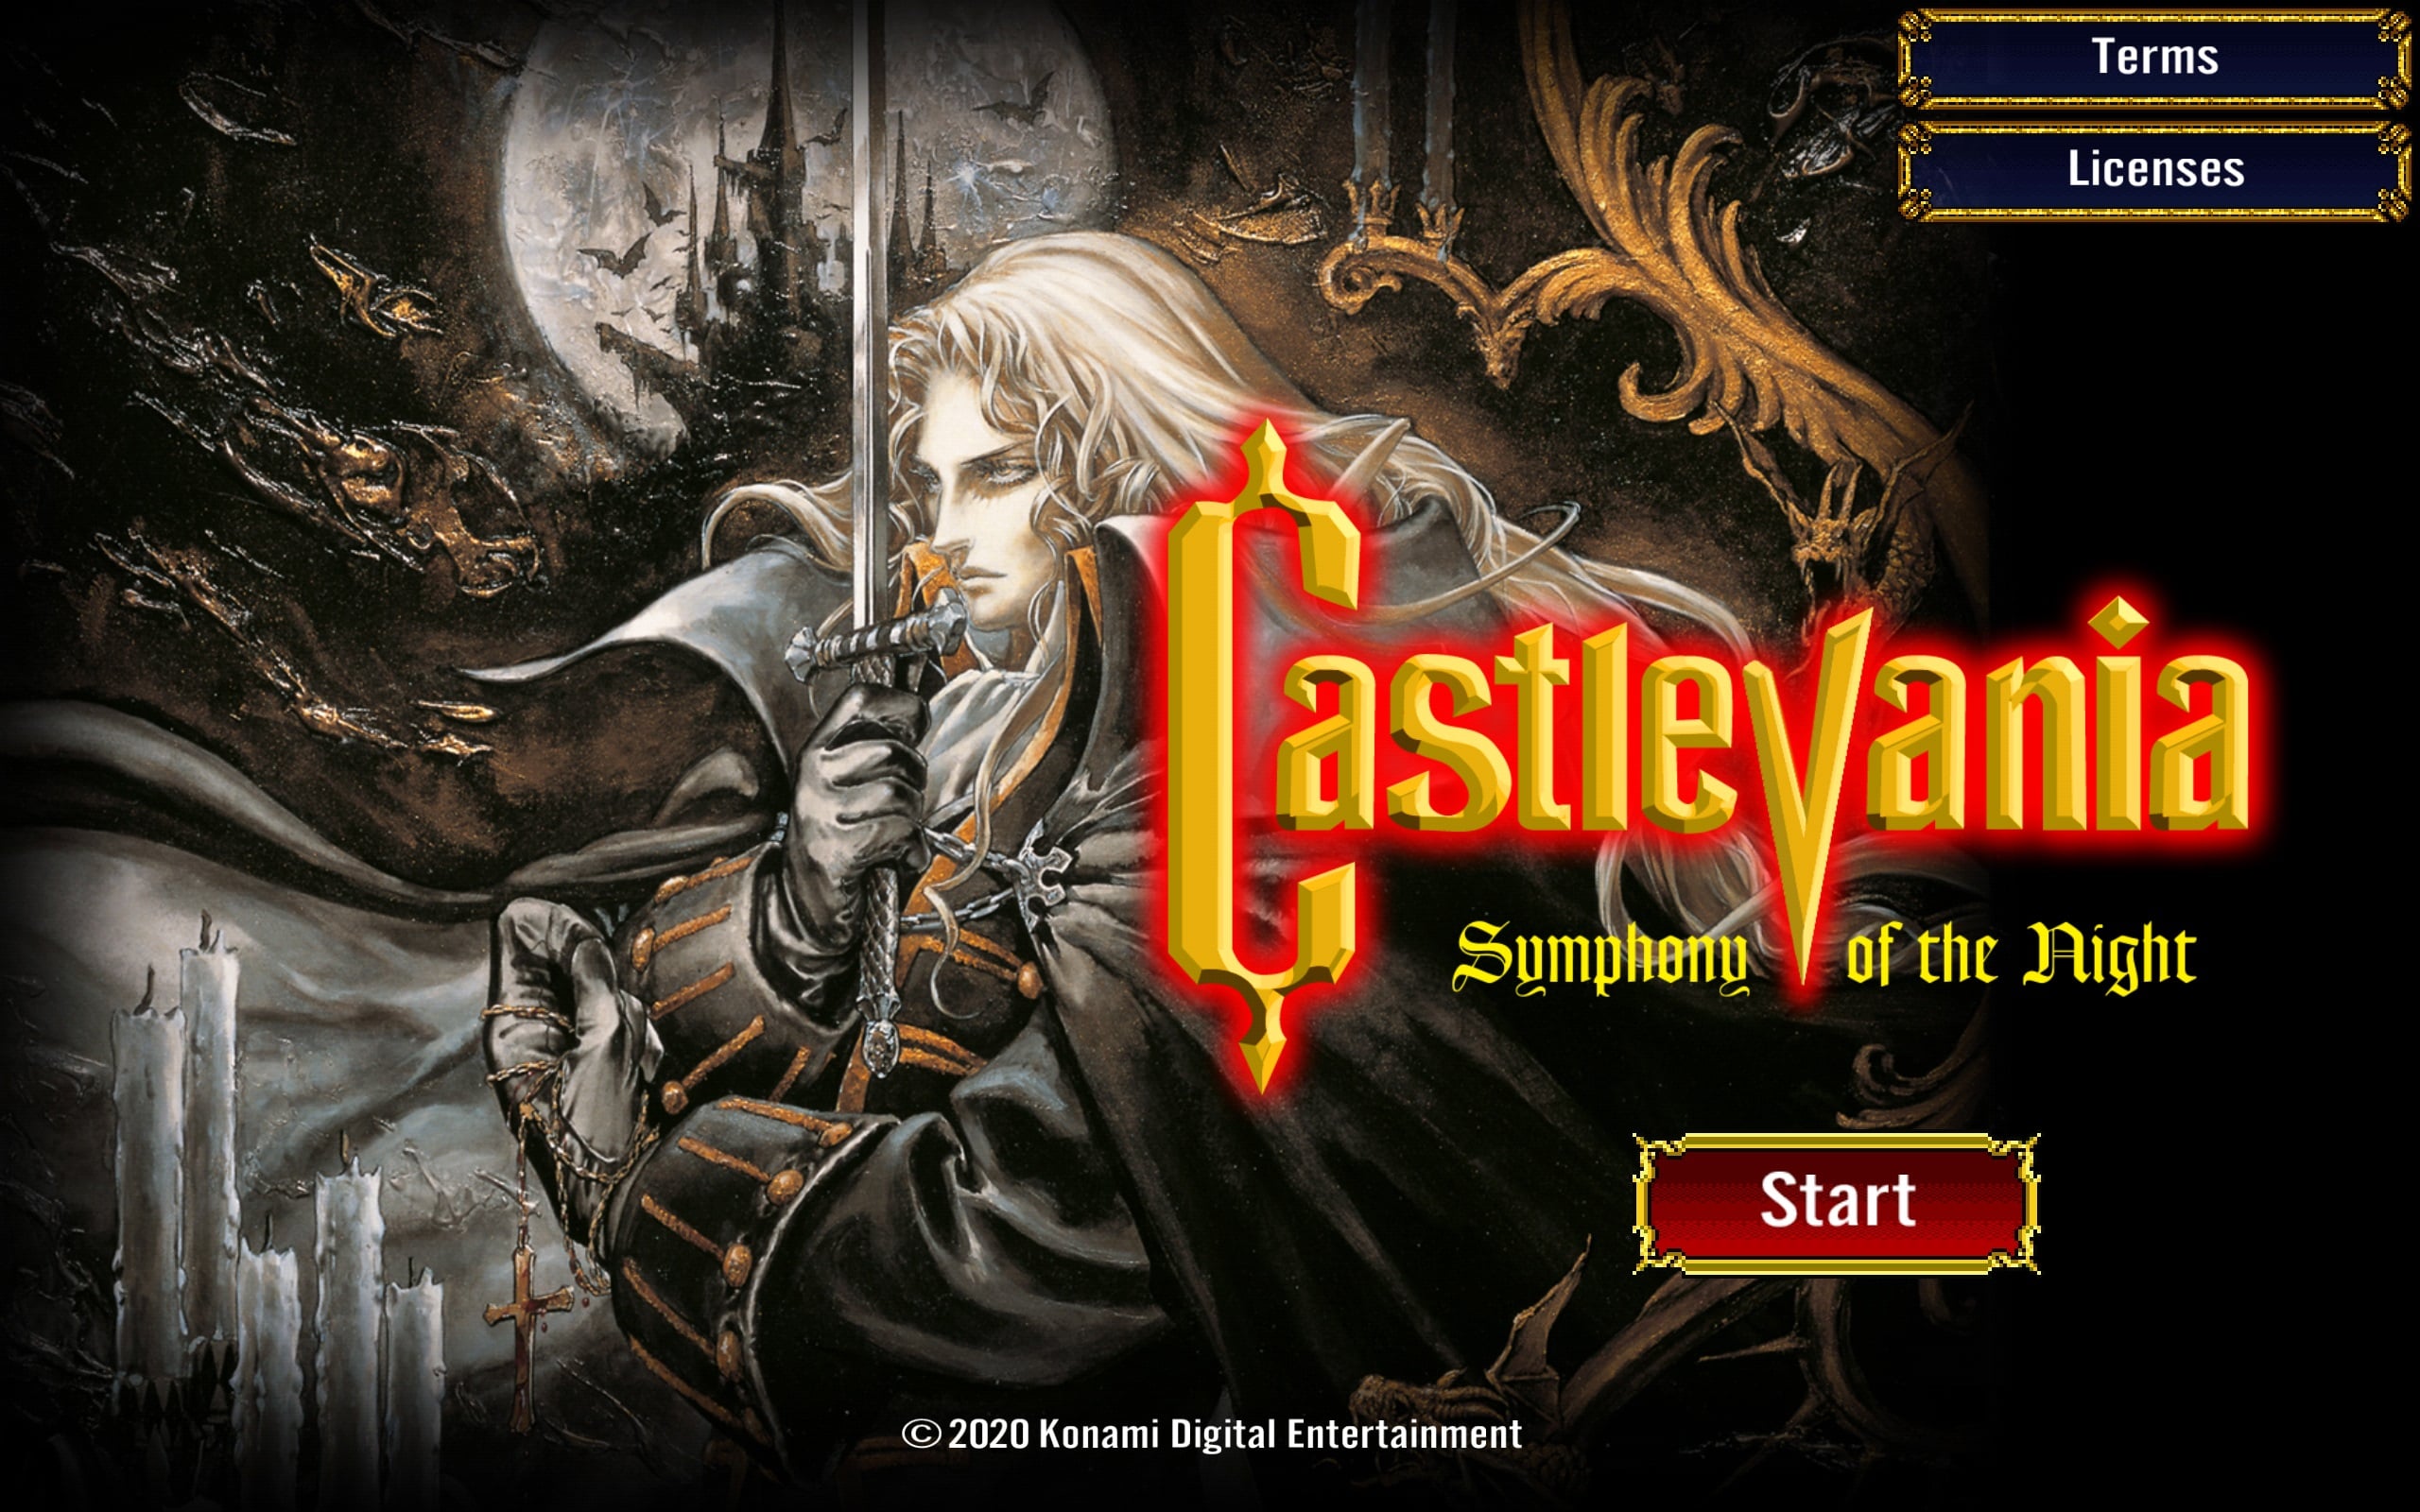 Castlevania android